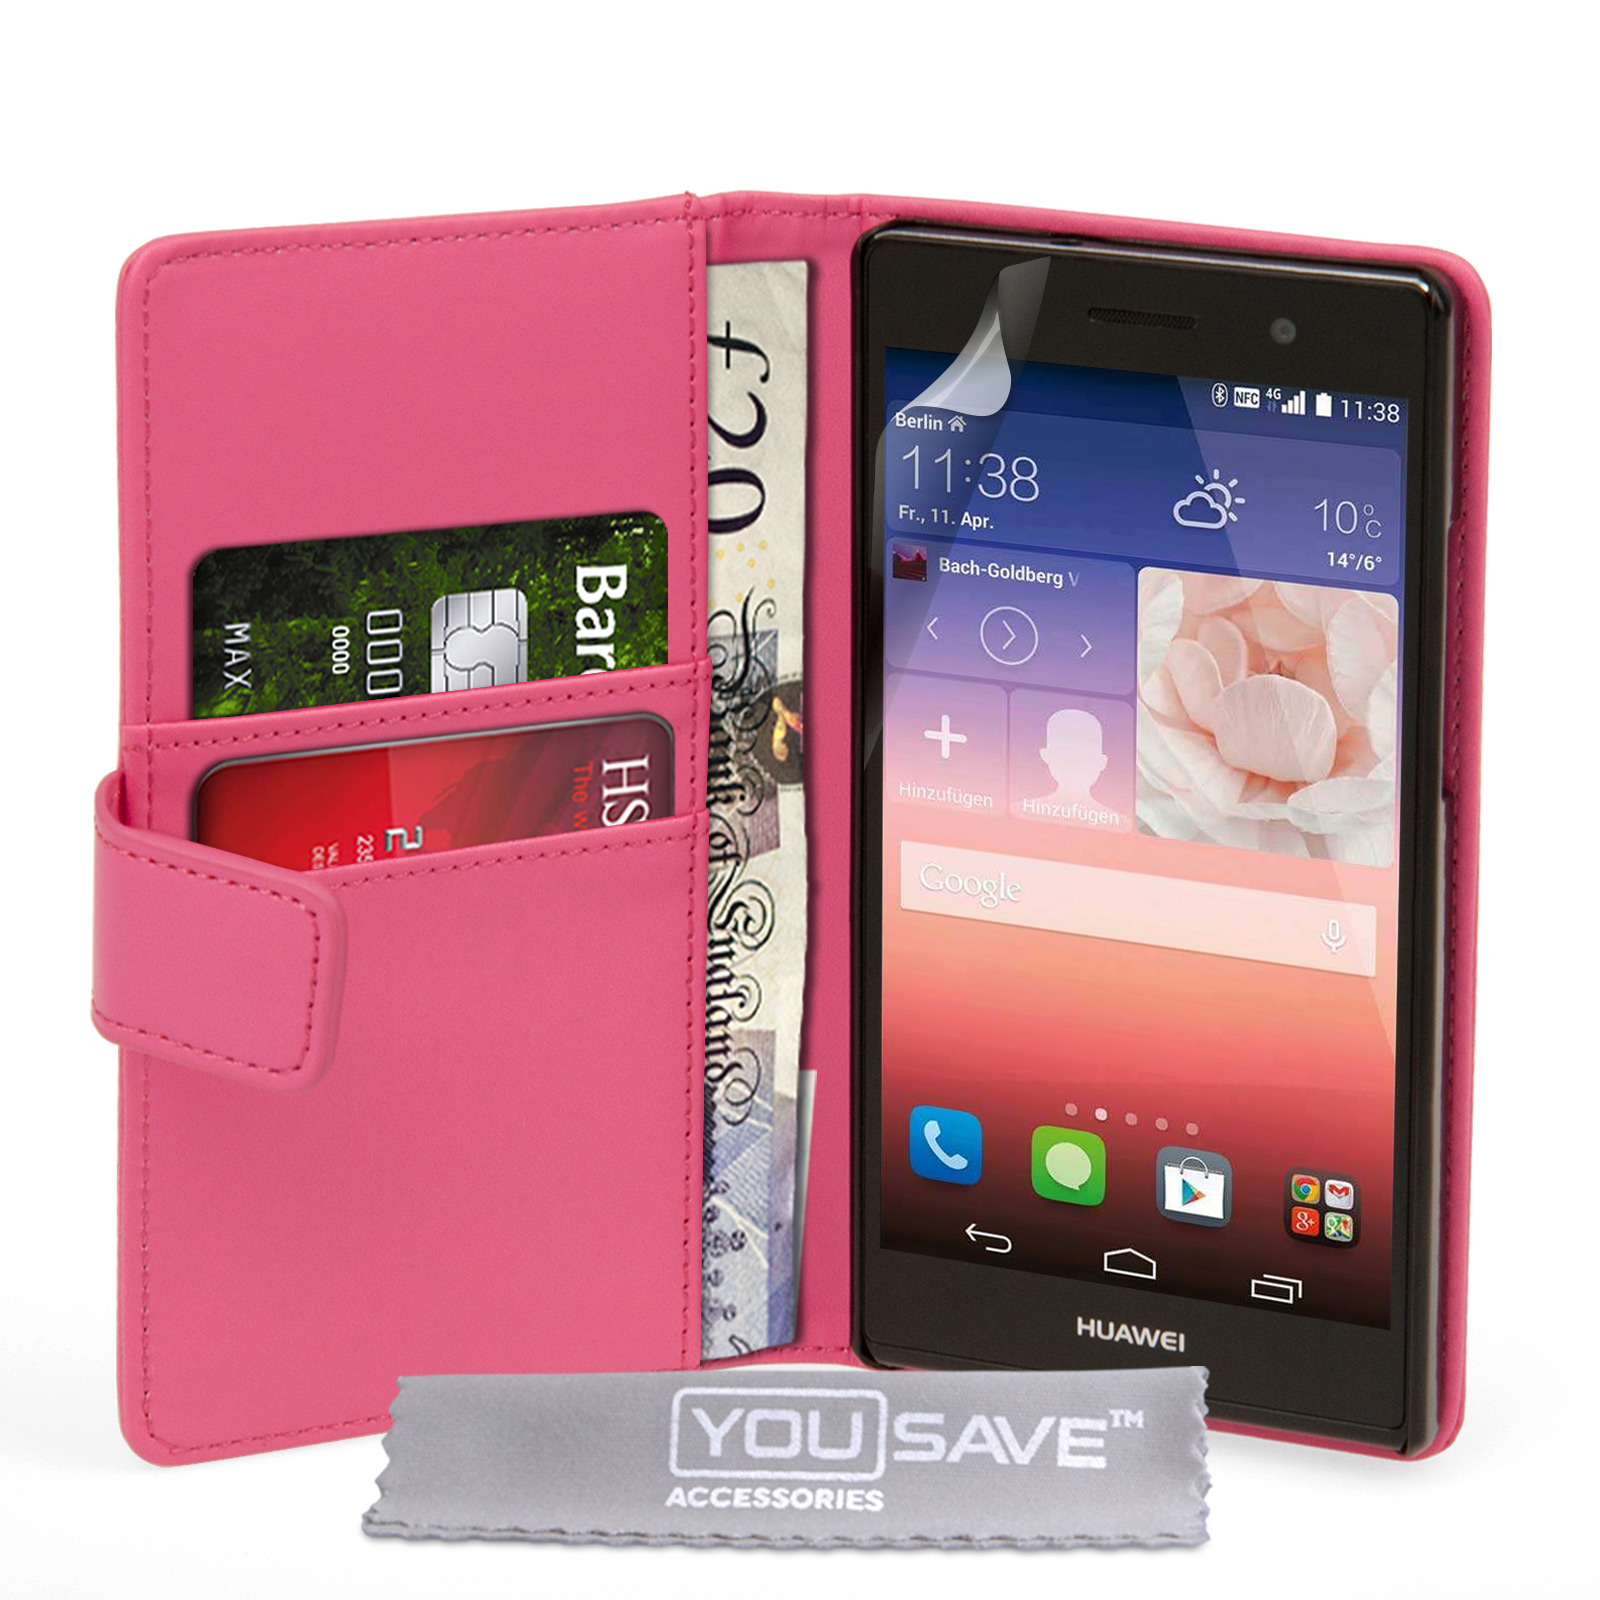 Huawei Ascend P7 Leather-Effect Wallet Case - Hot Pink